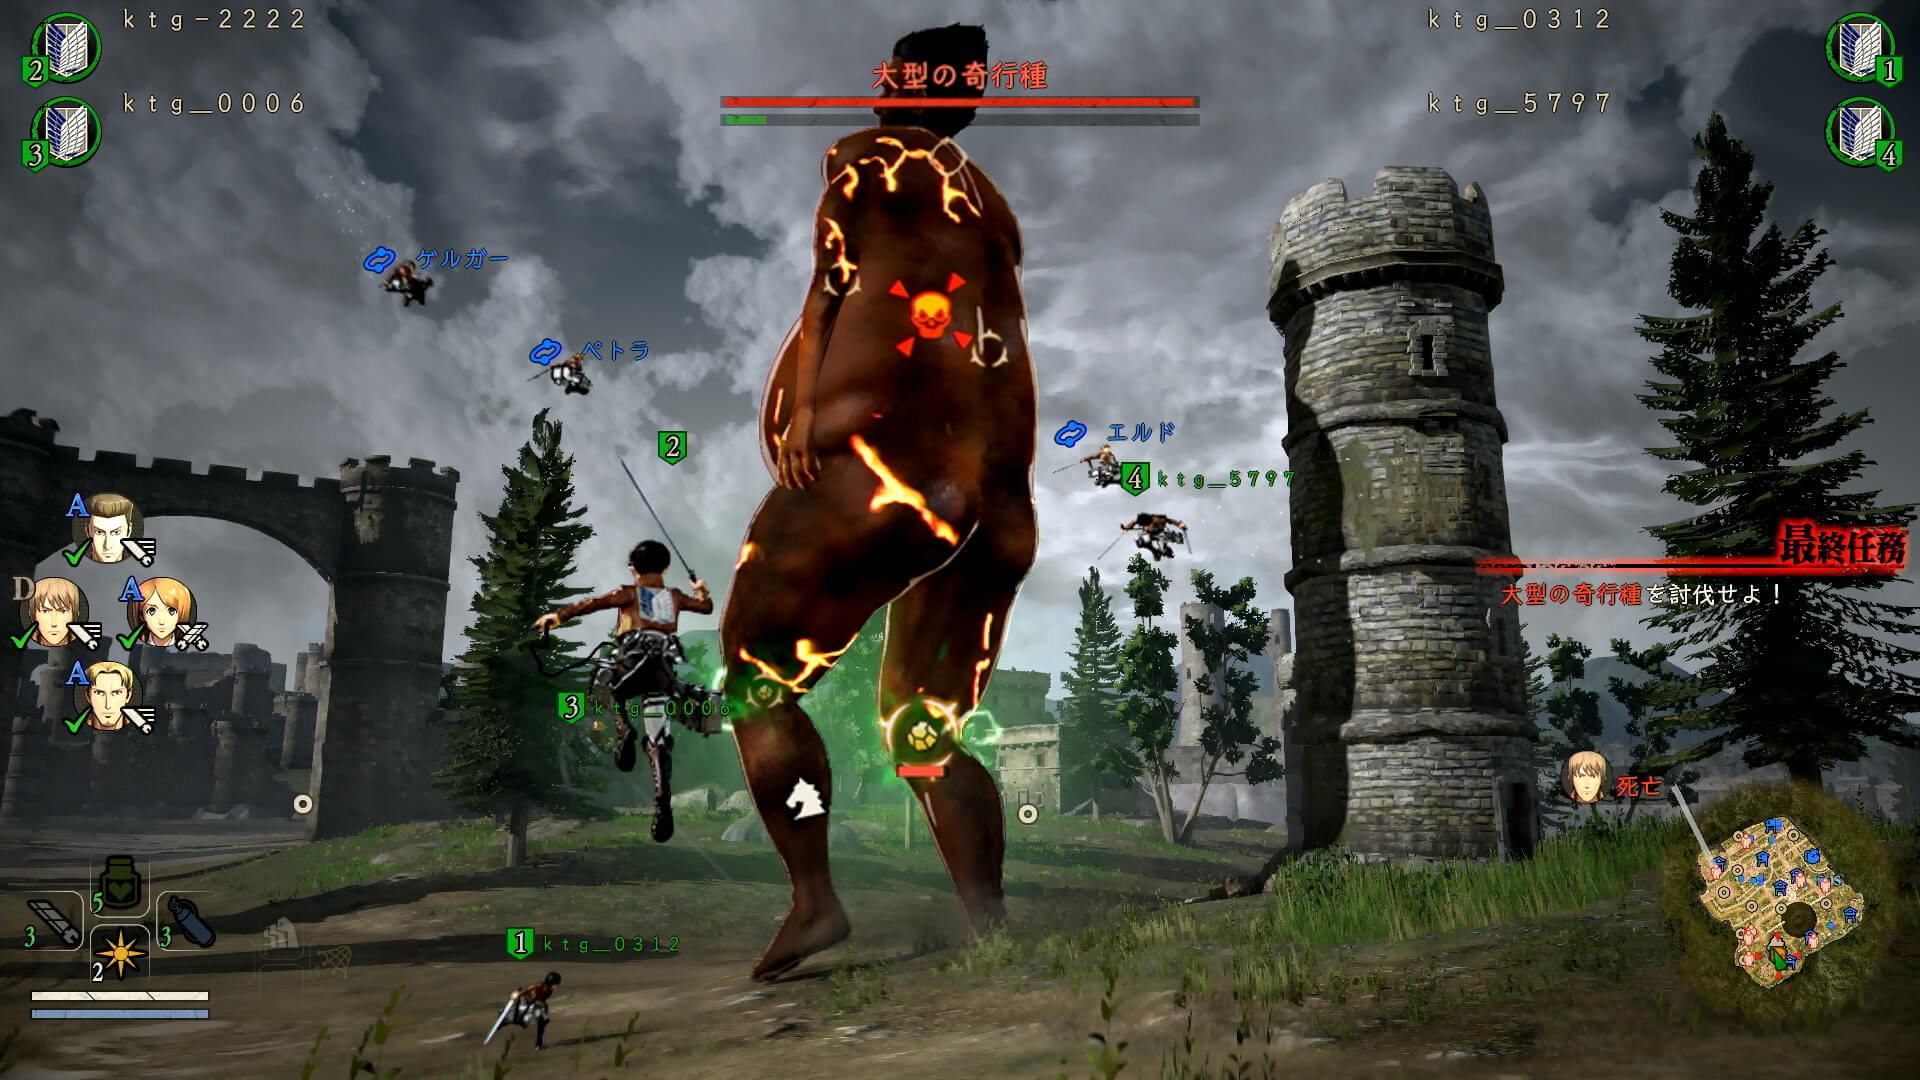 attack on titan online game free download